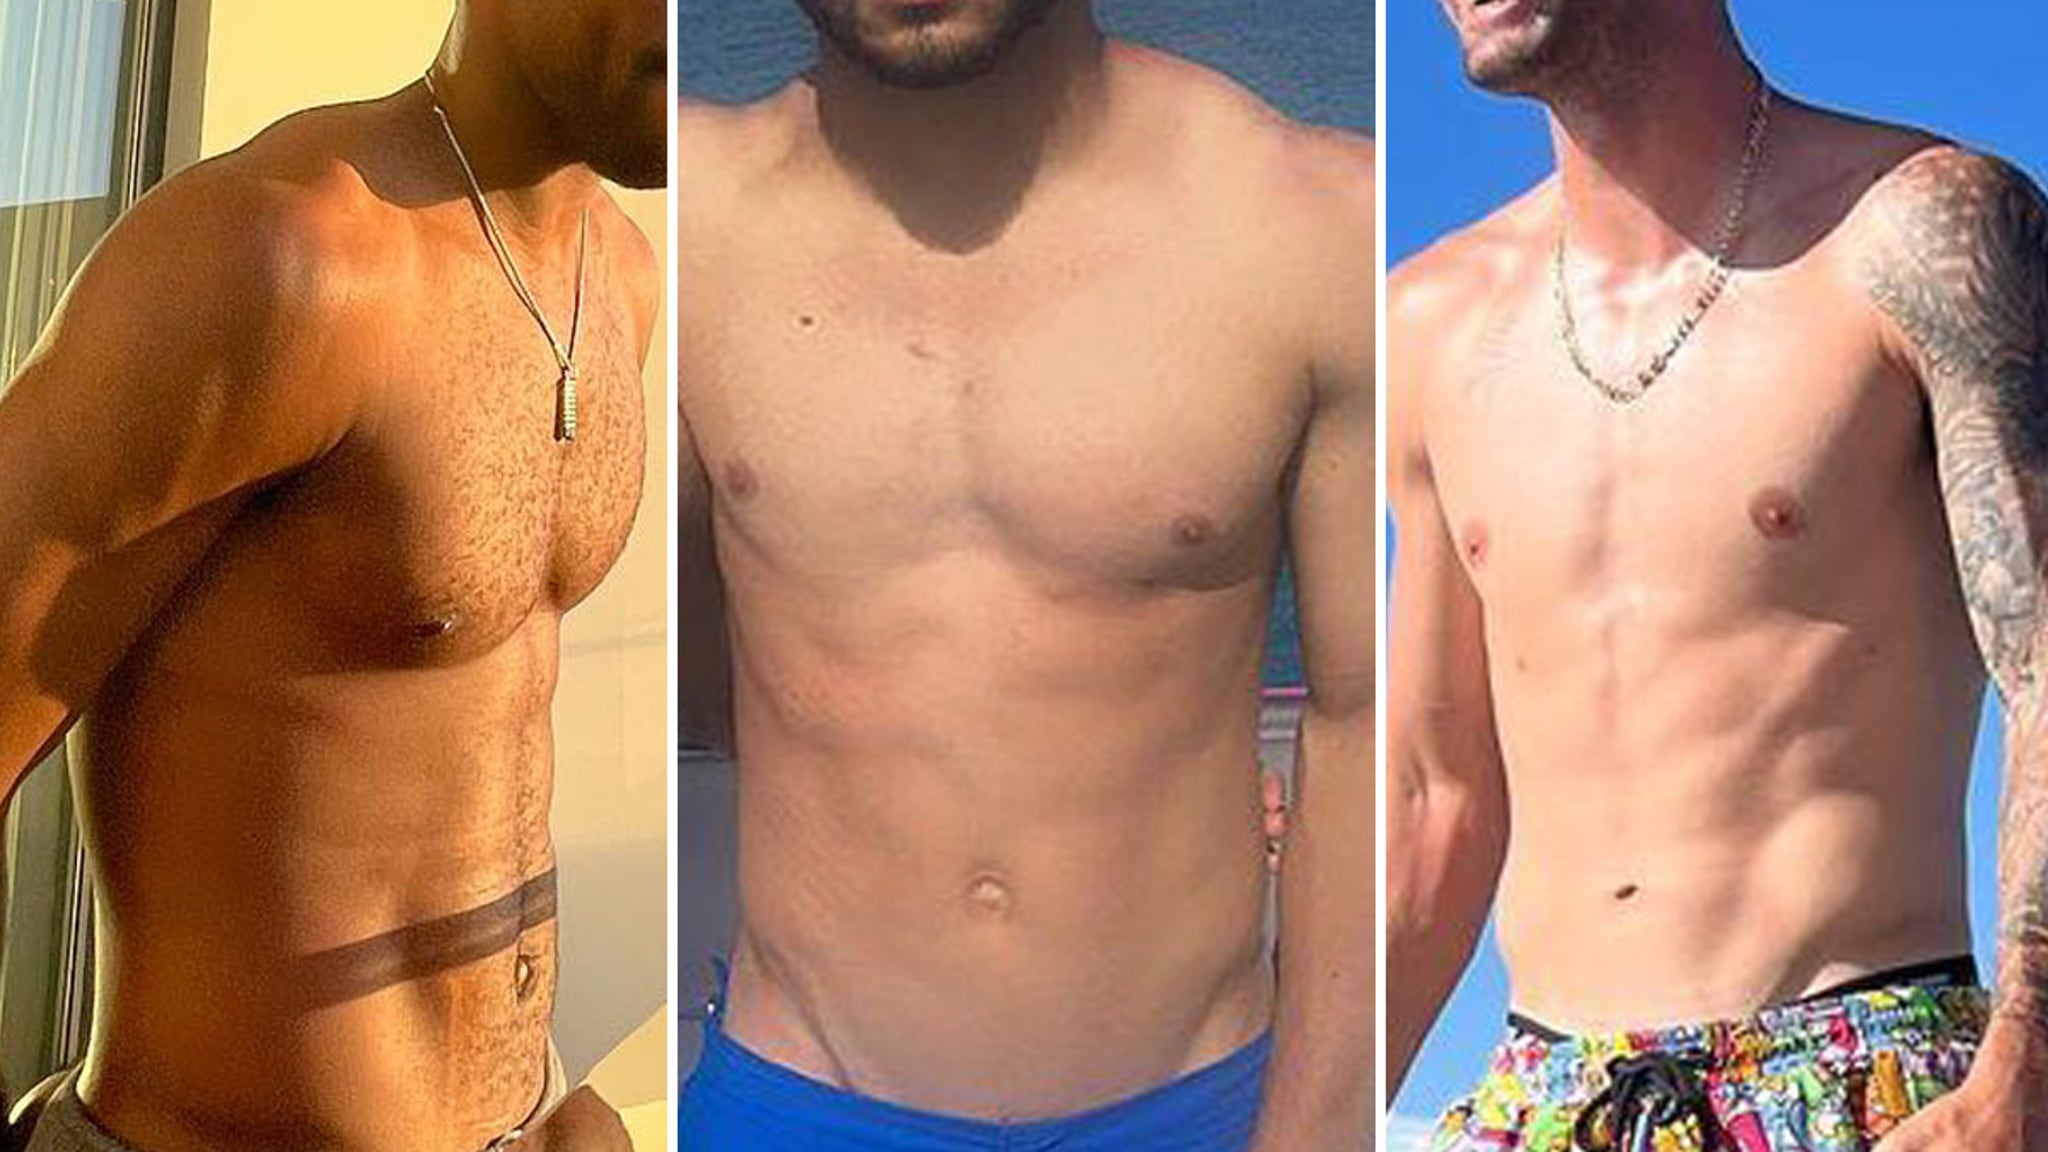 Team USA’s World Cup Abs — Guess Who!